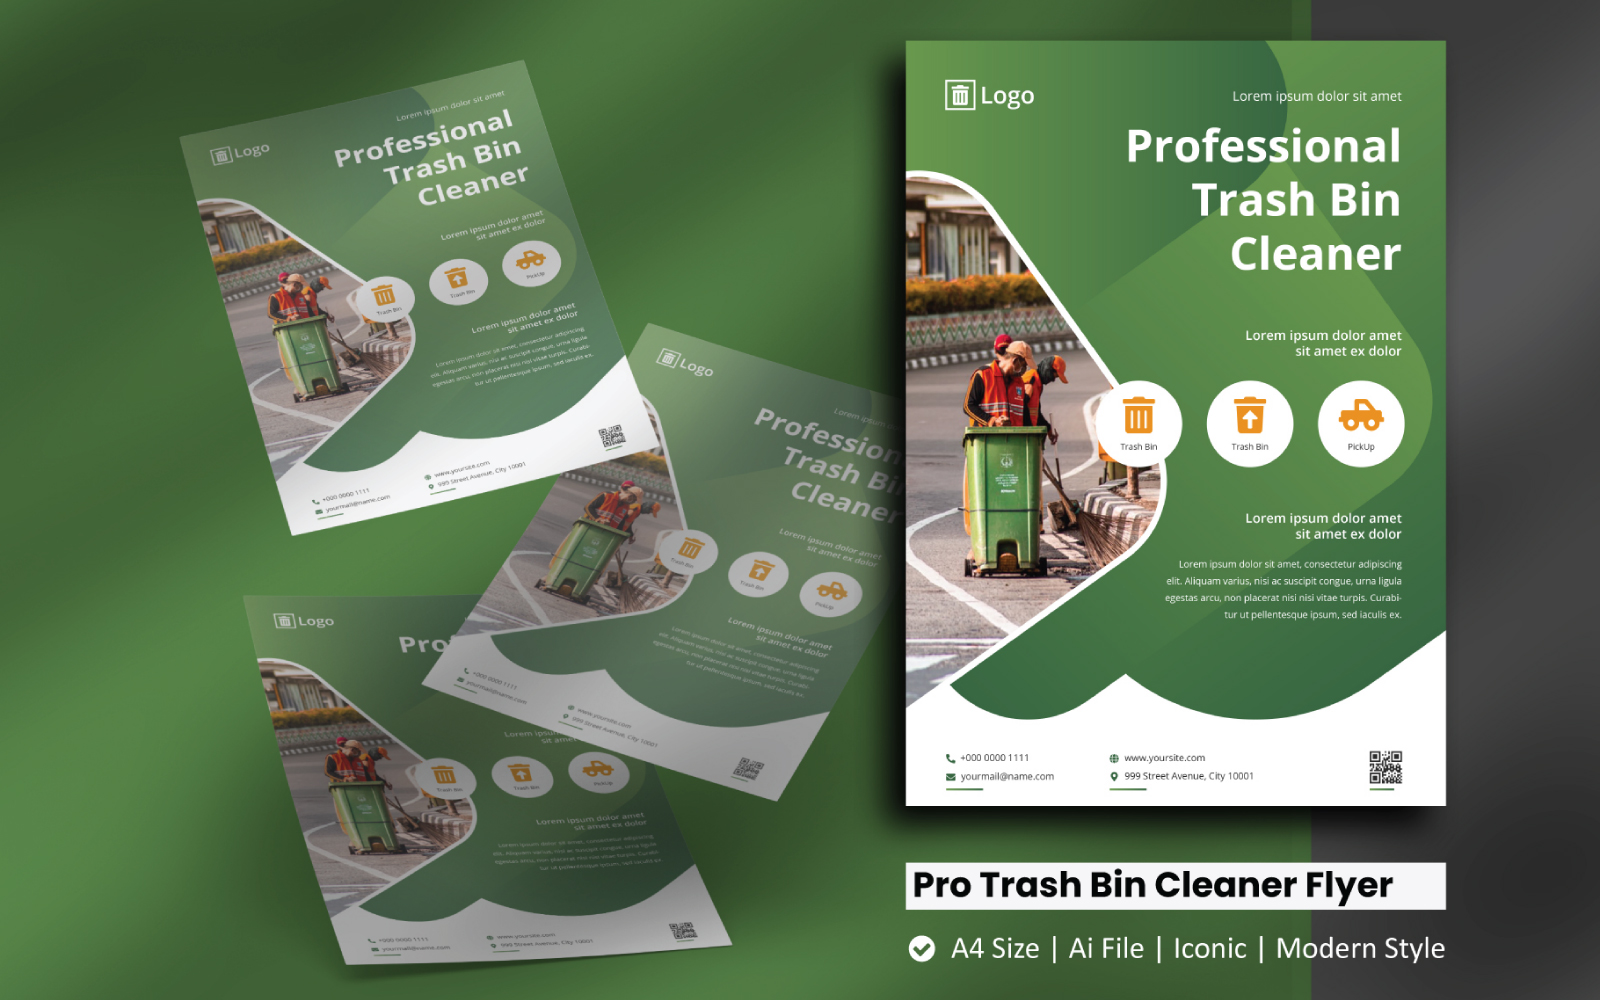 Professional Trash Bin Cleaner Flyer Corporate Identity Template